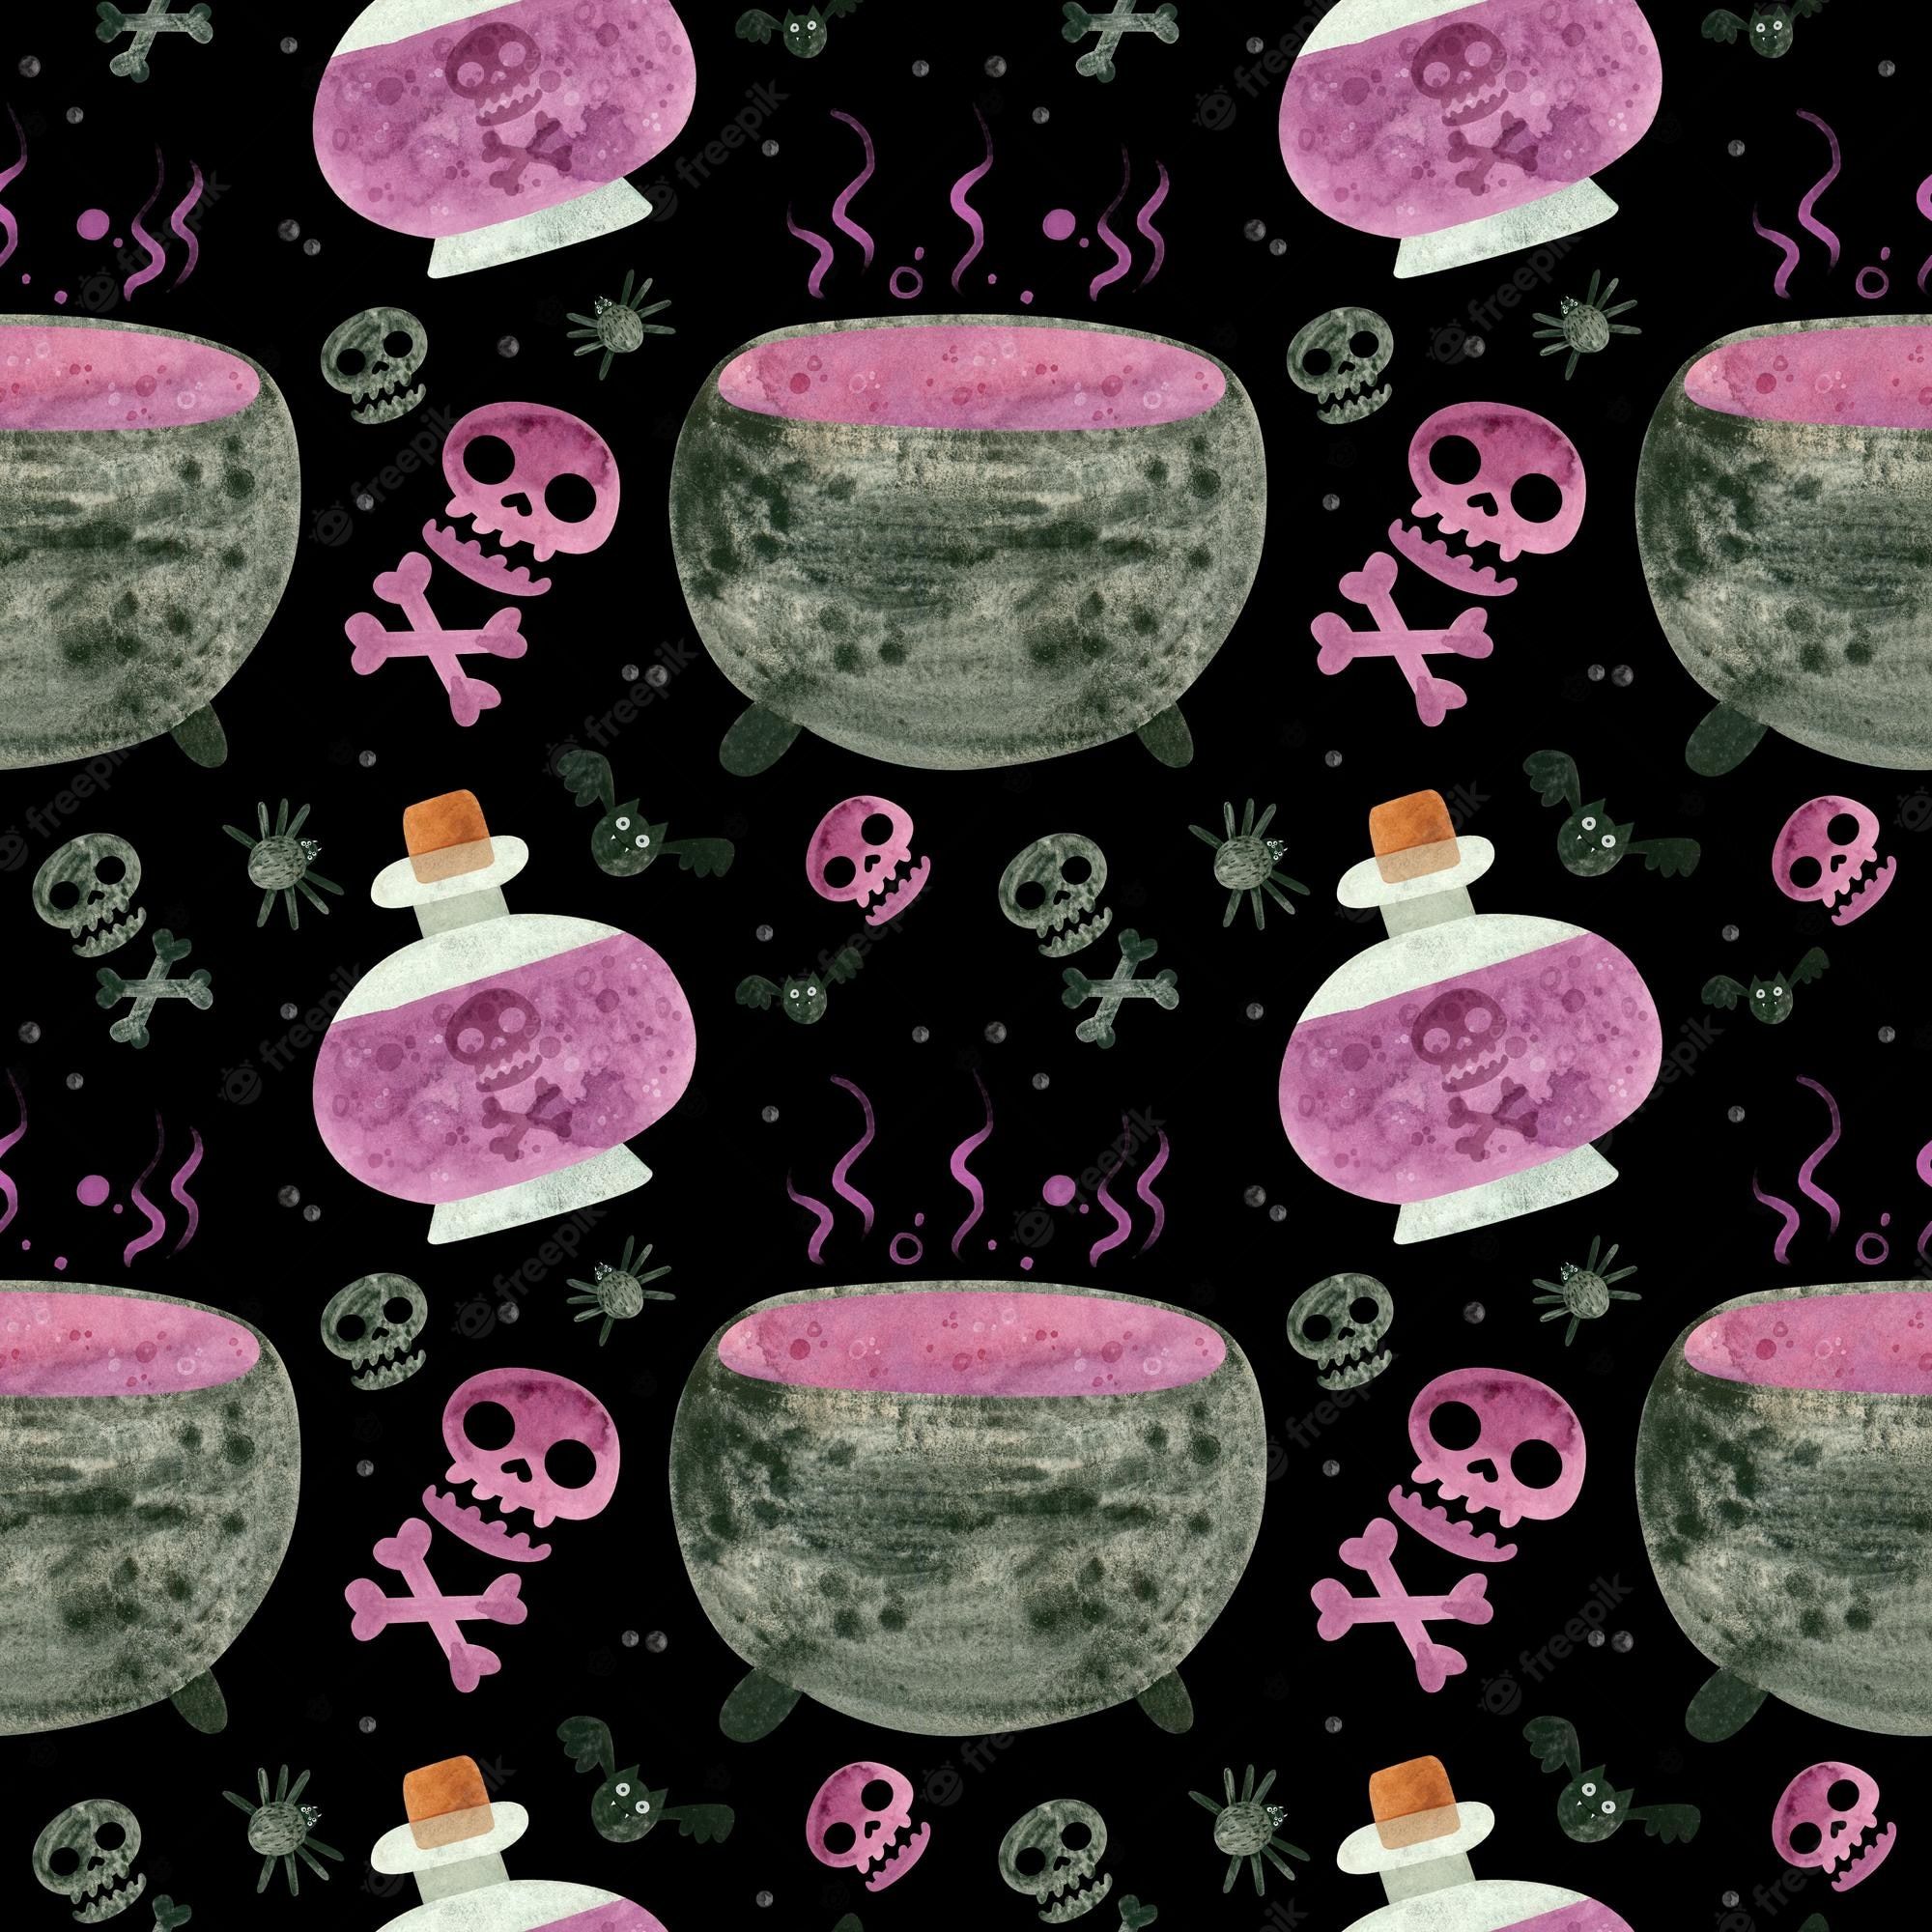 A watercolor illustration of a cauldron with a potion, skulls, spiders and bones on a black background. - Witch